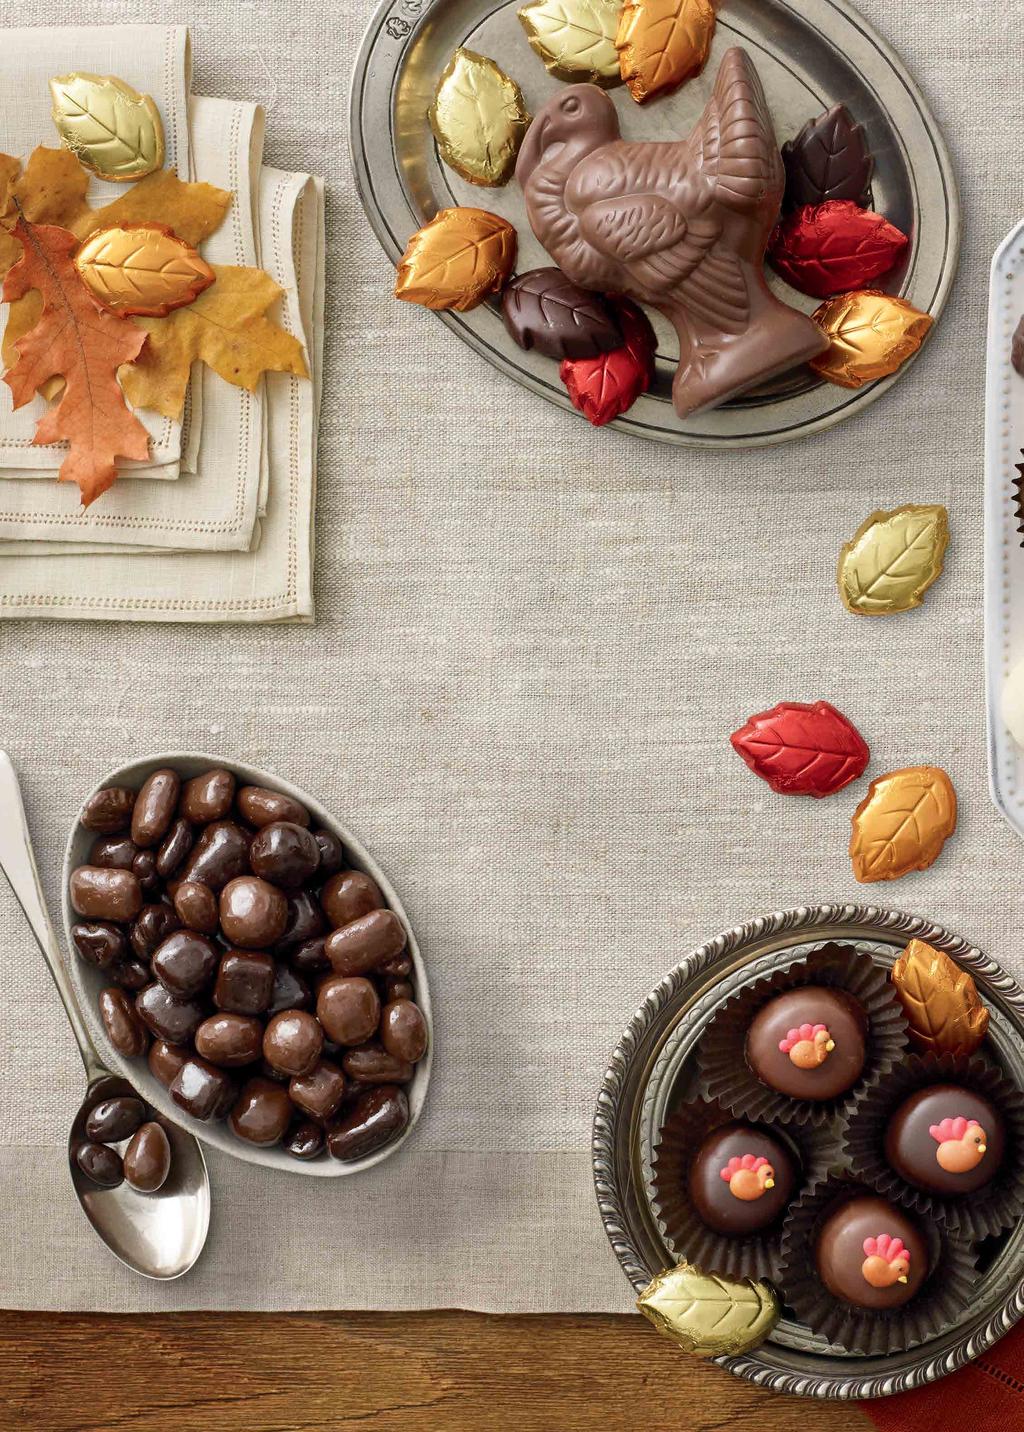 Dear friends, Bring sweet moments of joy to your favorite Thanksgiving traditions.